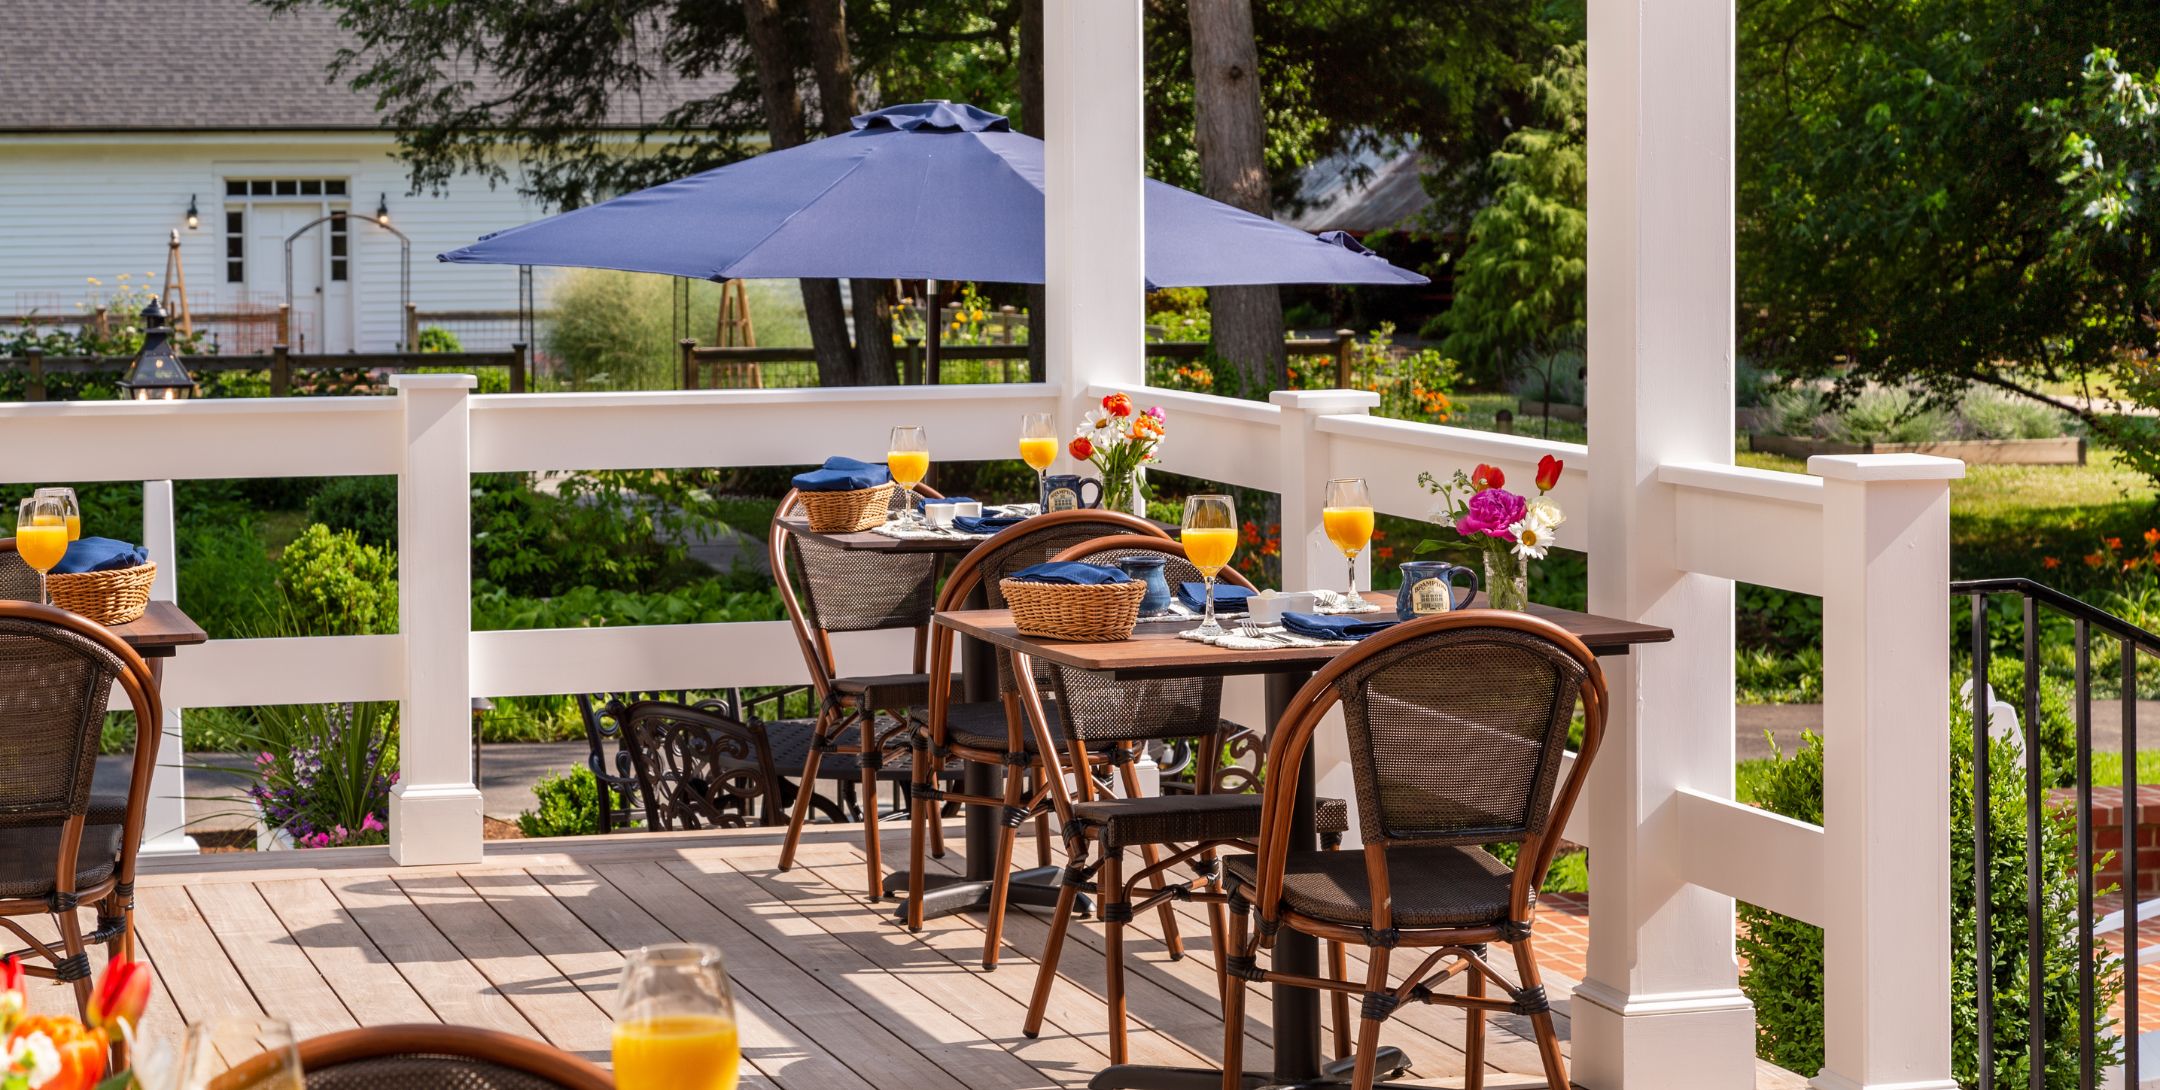 Outdoor dining deck with wicker tables for two set with orange juice in wine glasses, surrounded by lush landscaping